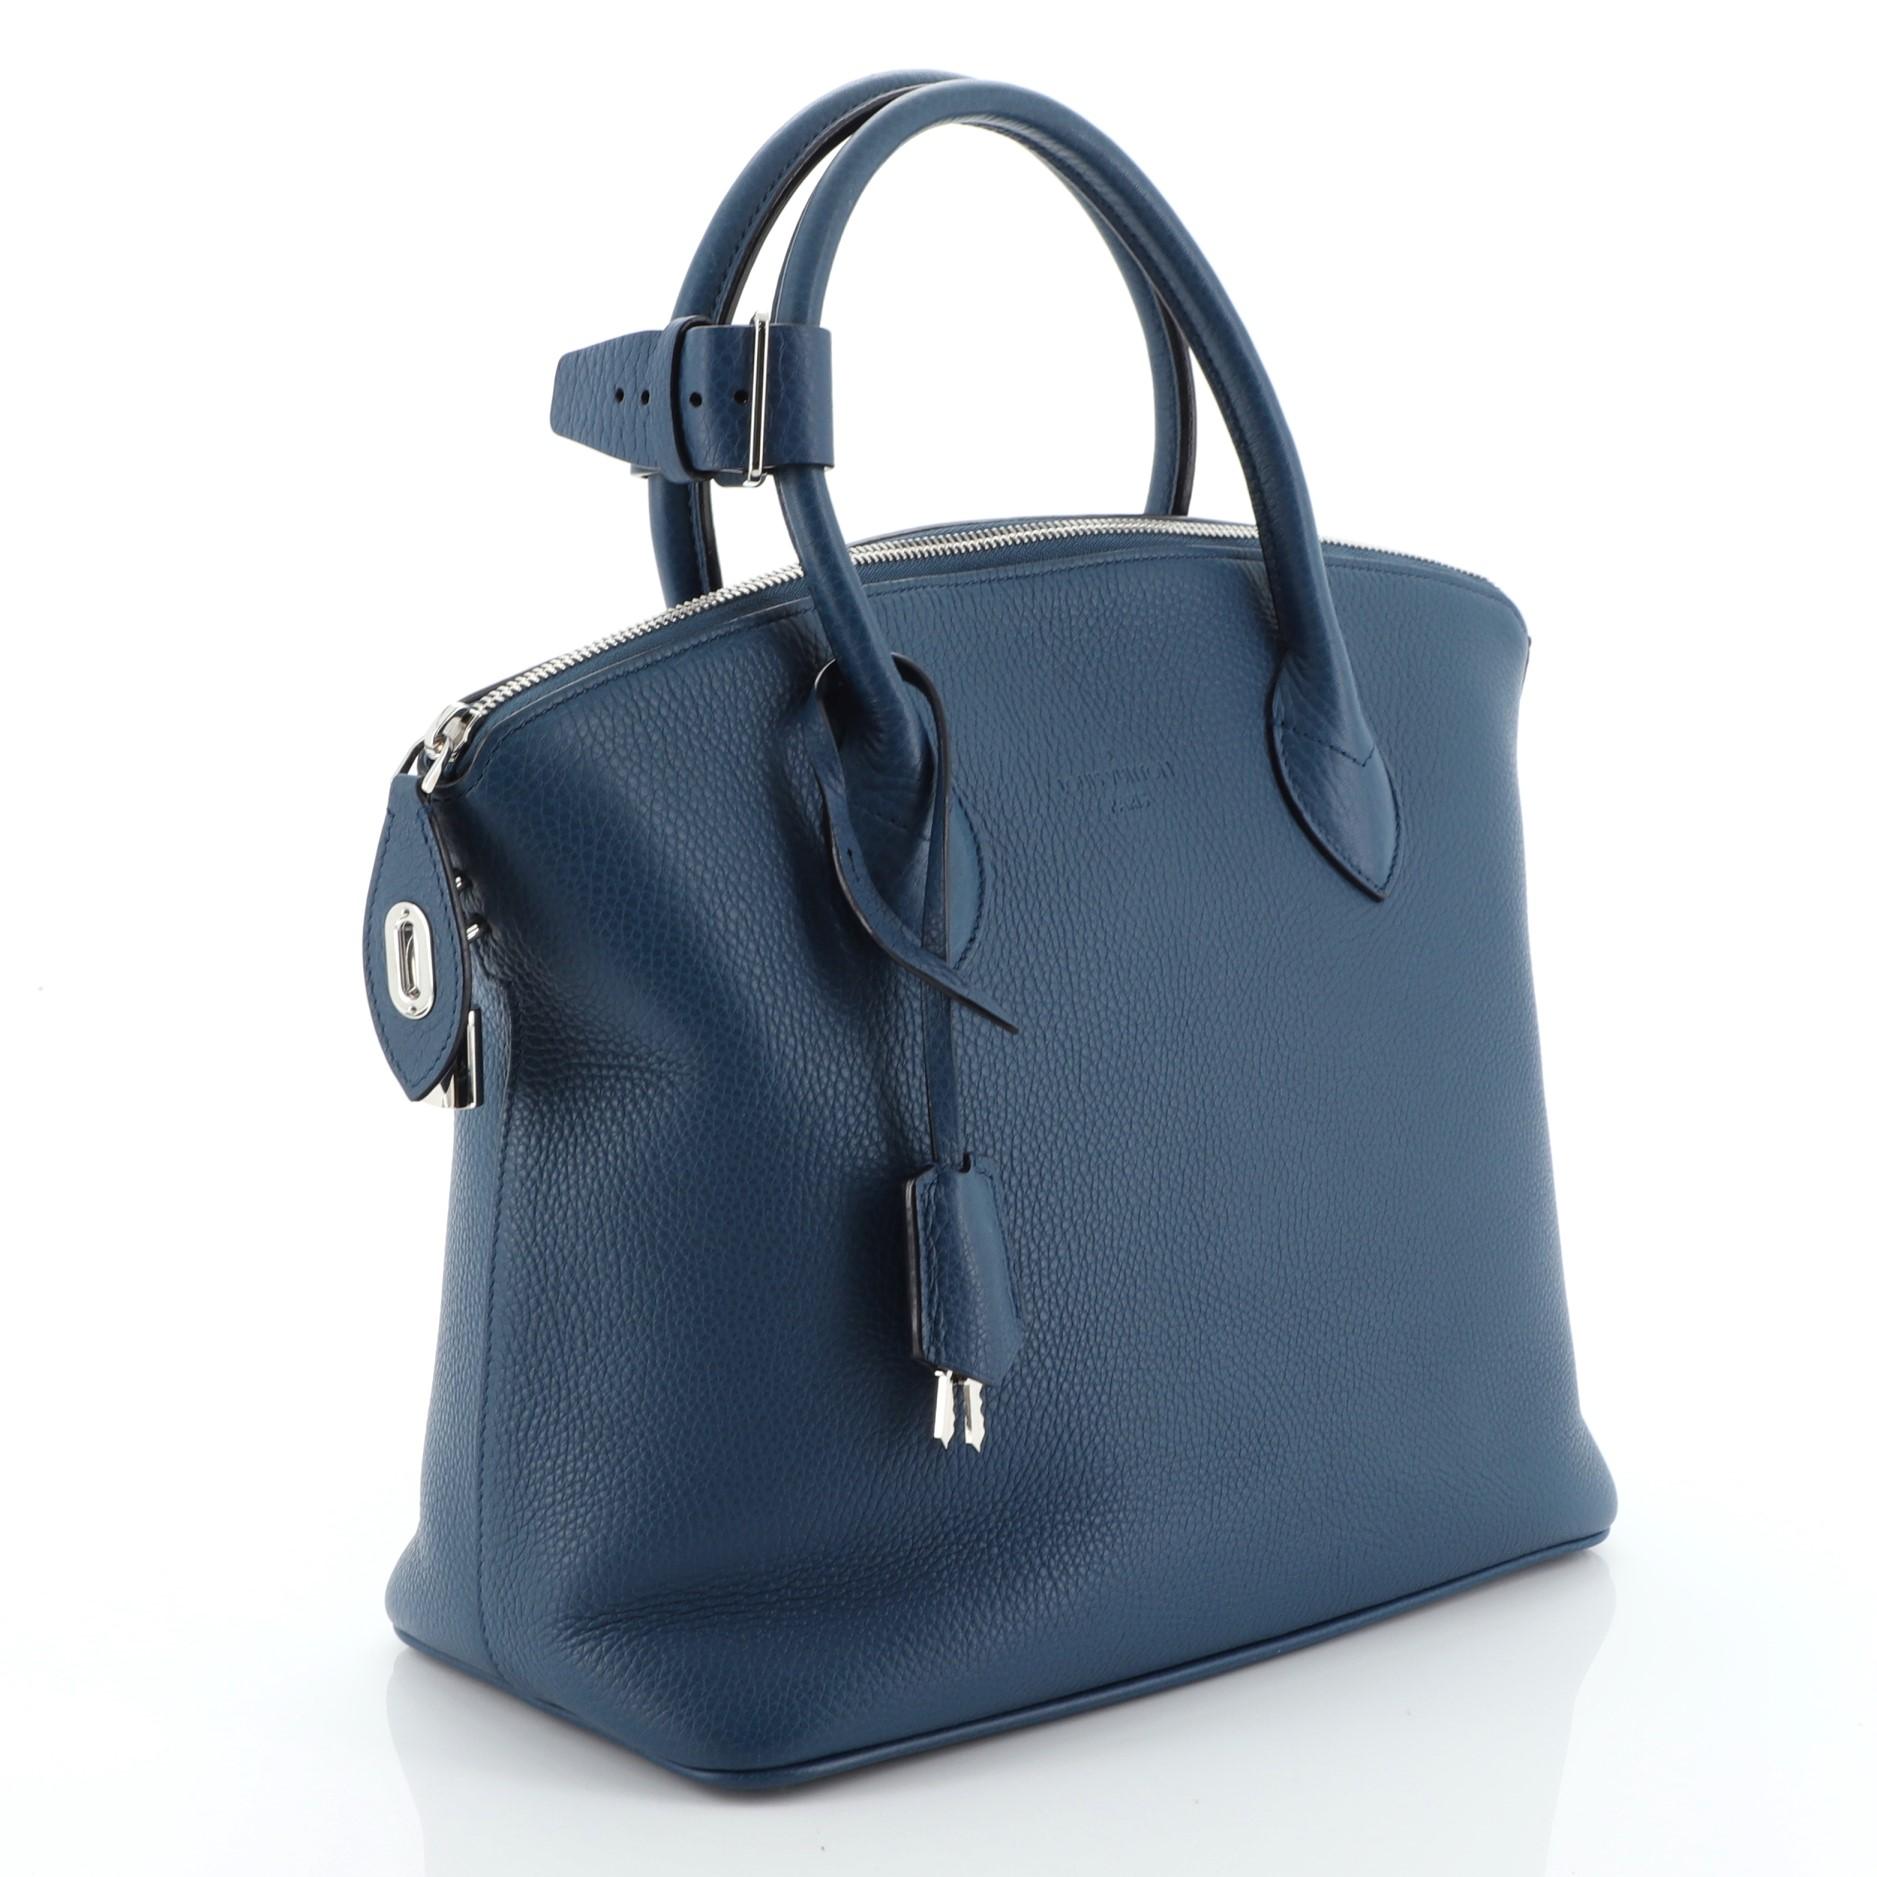 This Louis Vuitton Haute Maroquinerie Lockit Handbag Leather PM, crafted in blue leather, features dual rolled leather handles, protective base studs and silver-tone hardware. Its zip closure opens to a blue leather interior with zip and slip